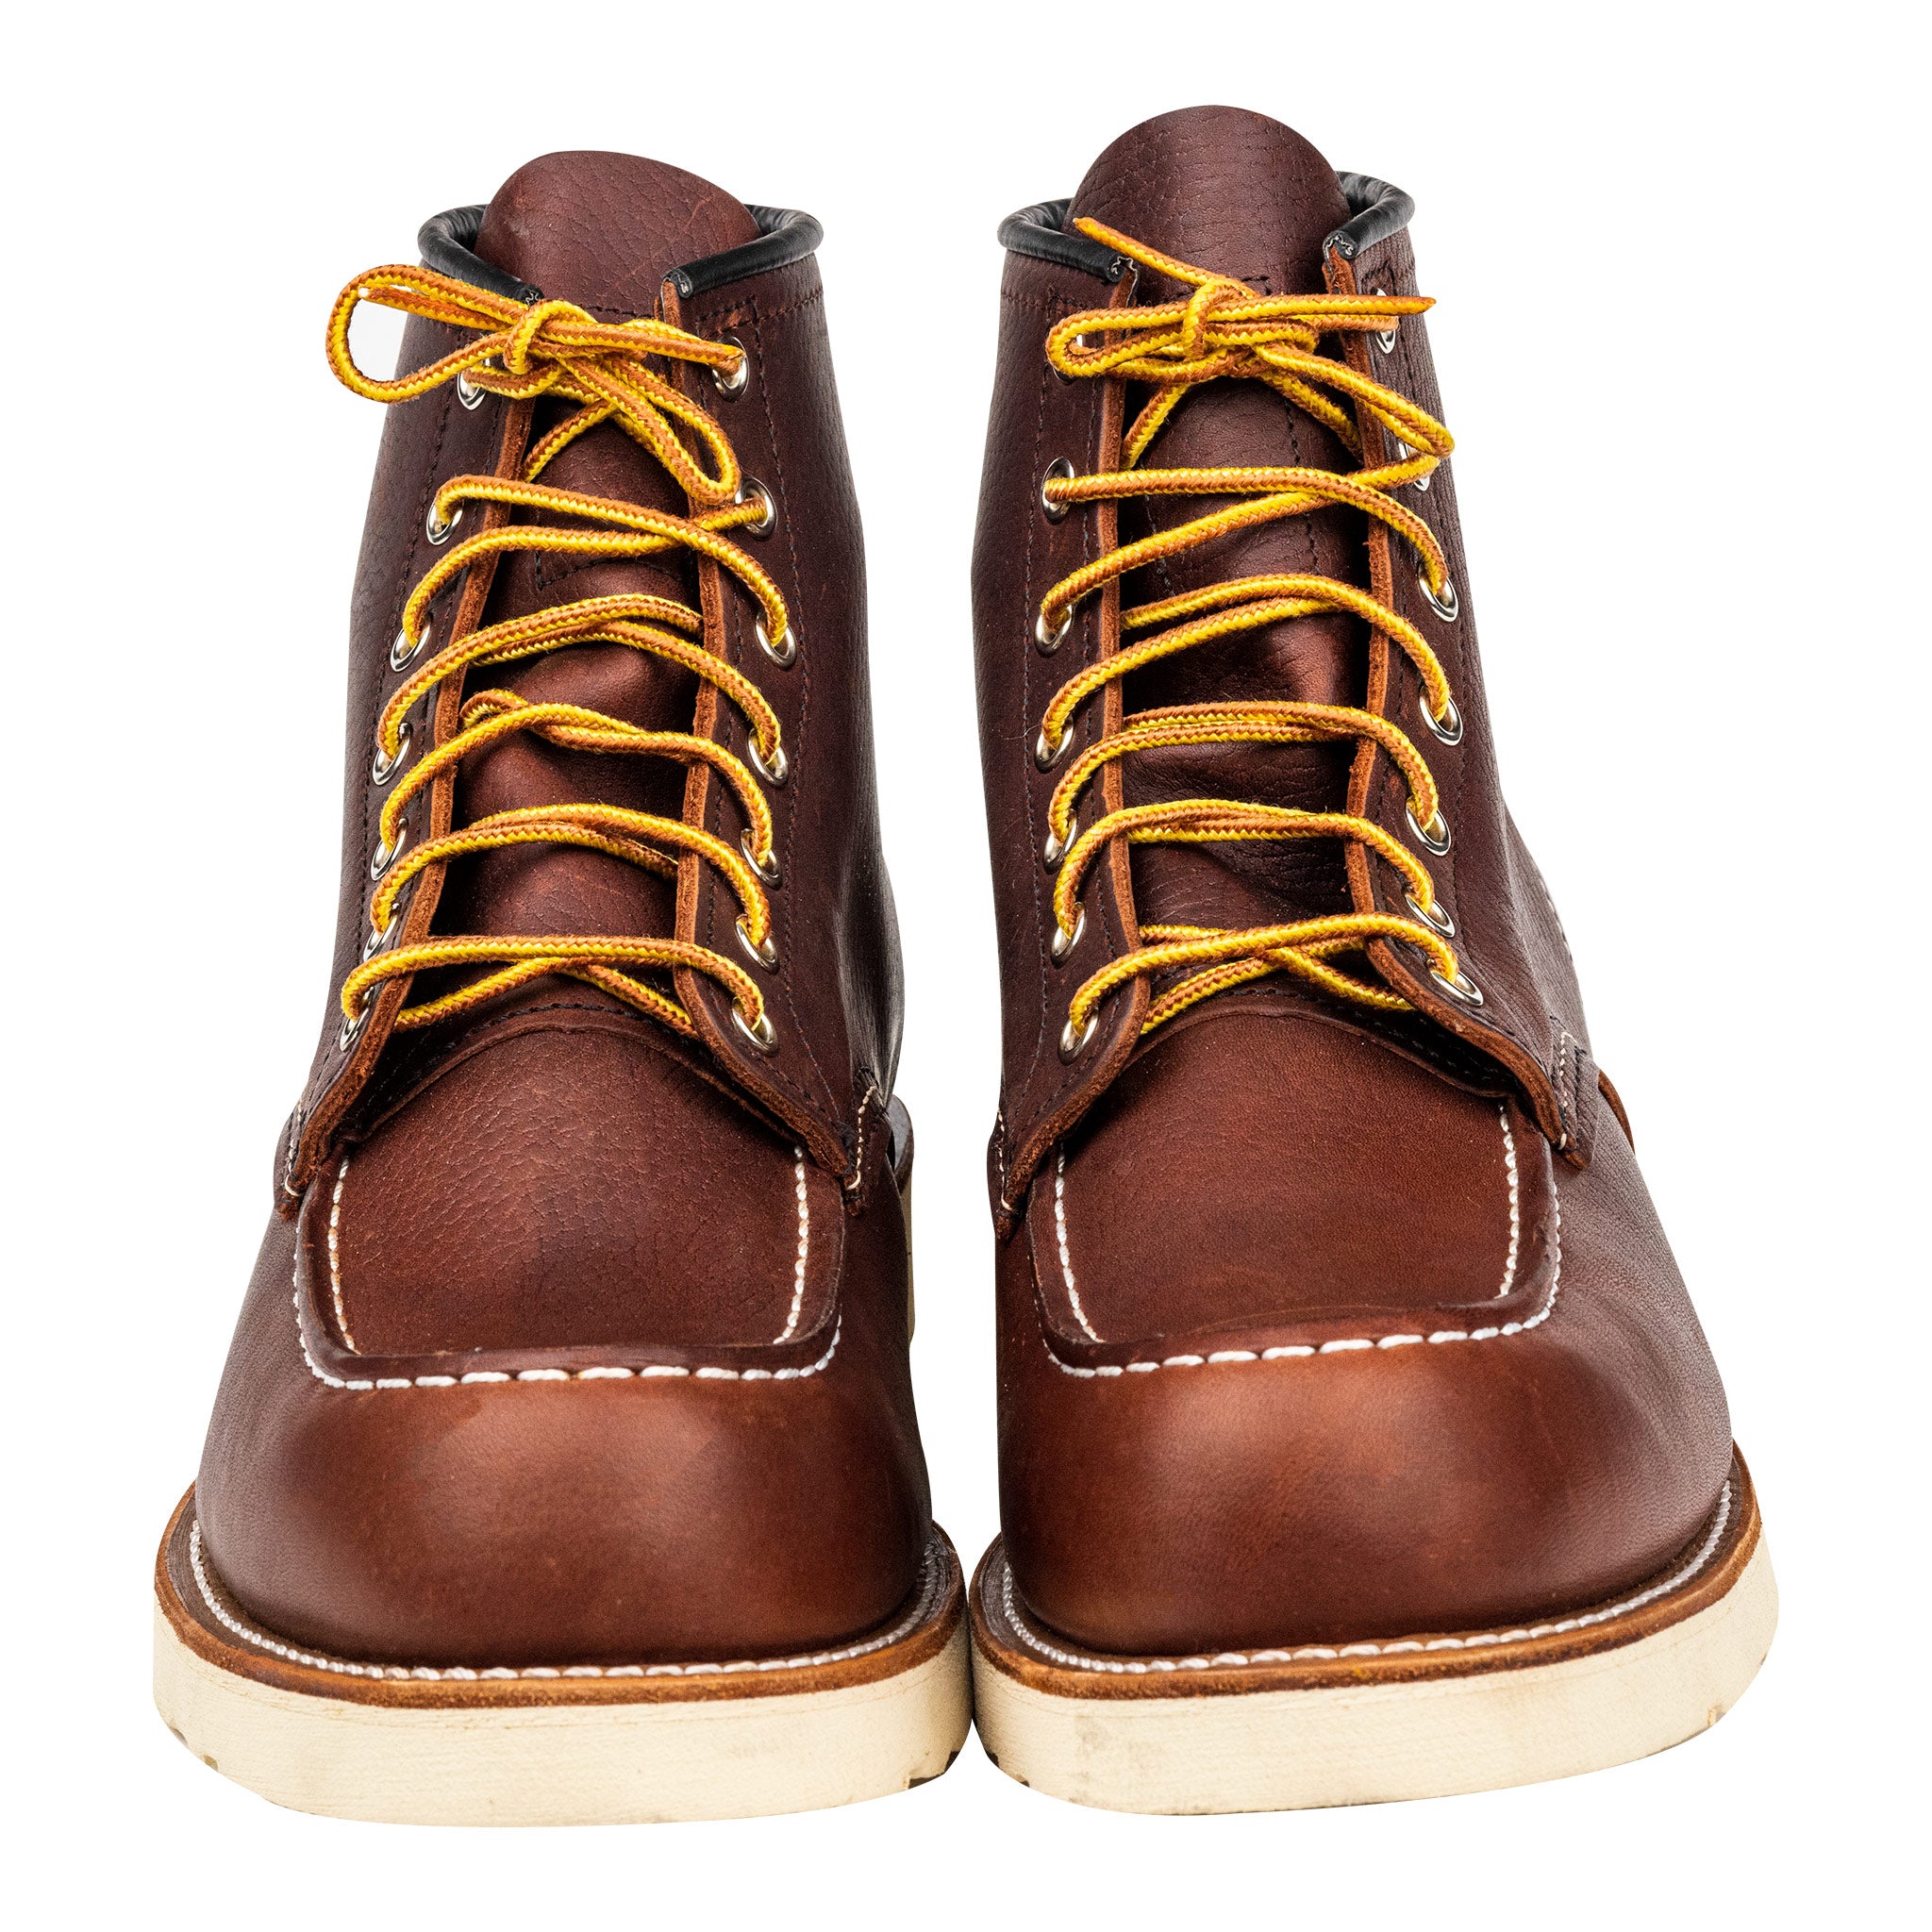 Red Wing Moc Toe Boot, $270, Nordstrom